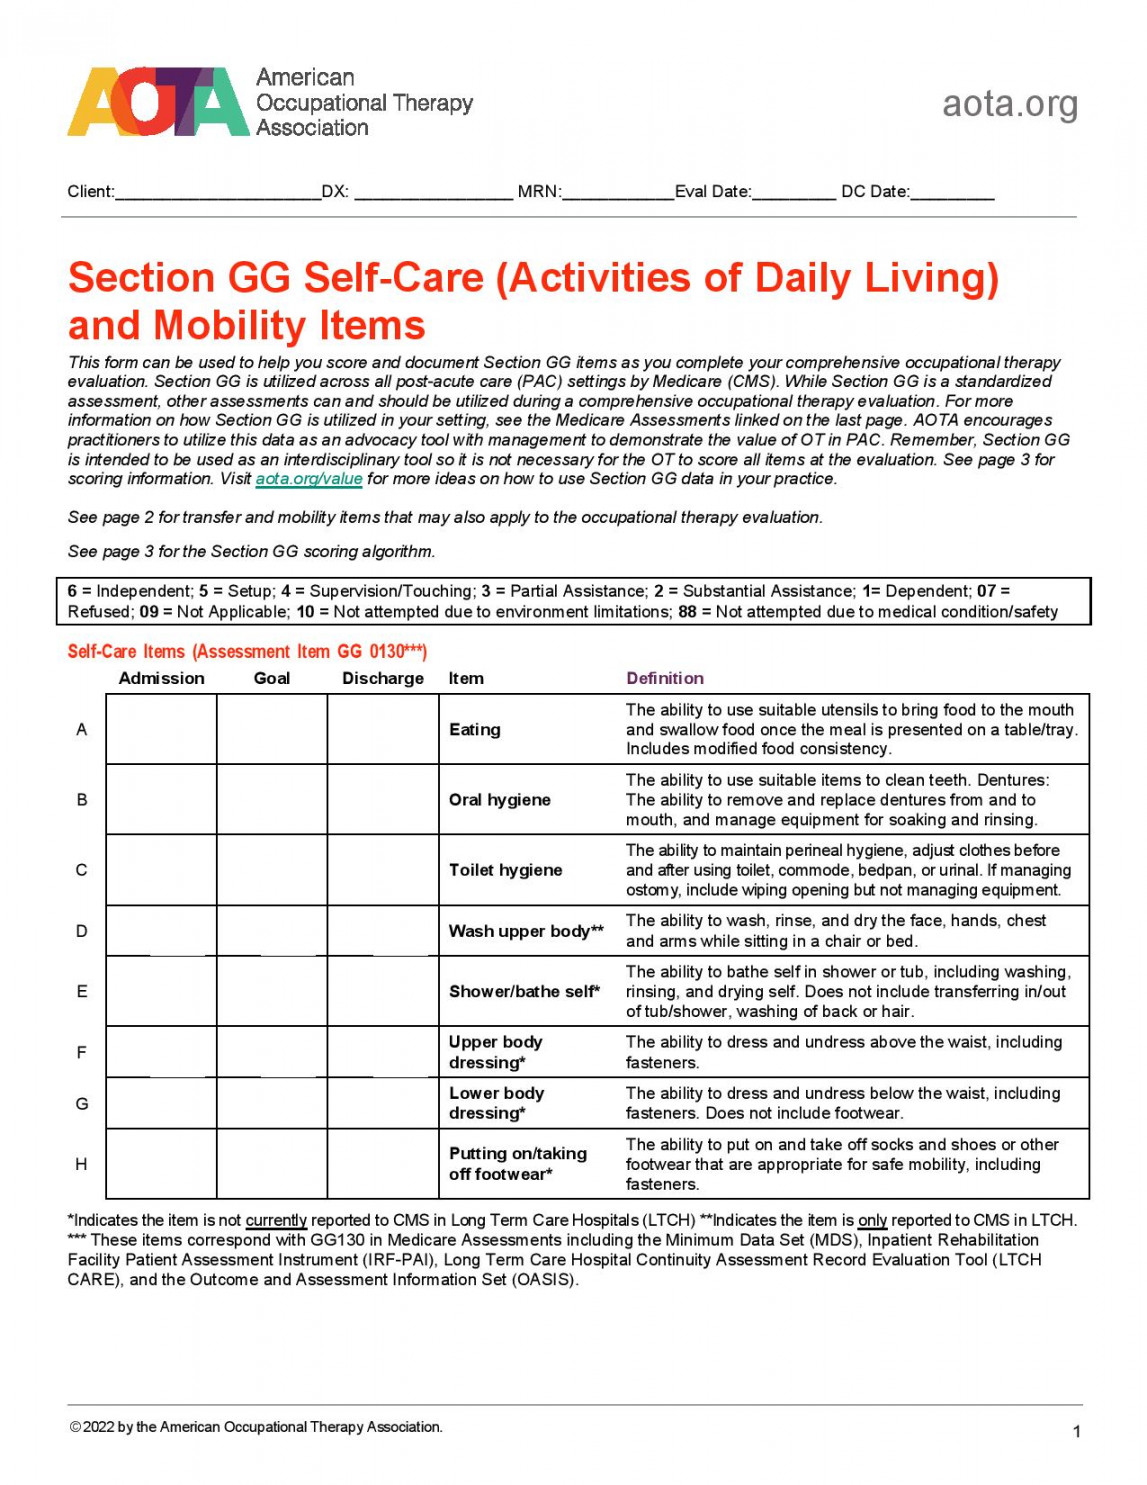 Section GG Self-Care (Activities of Daily Living) and Mobility